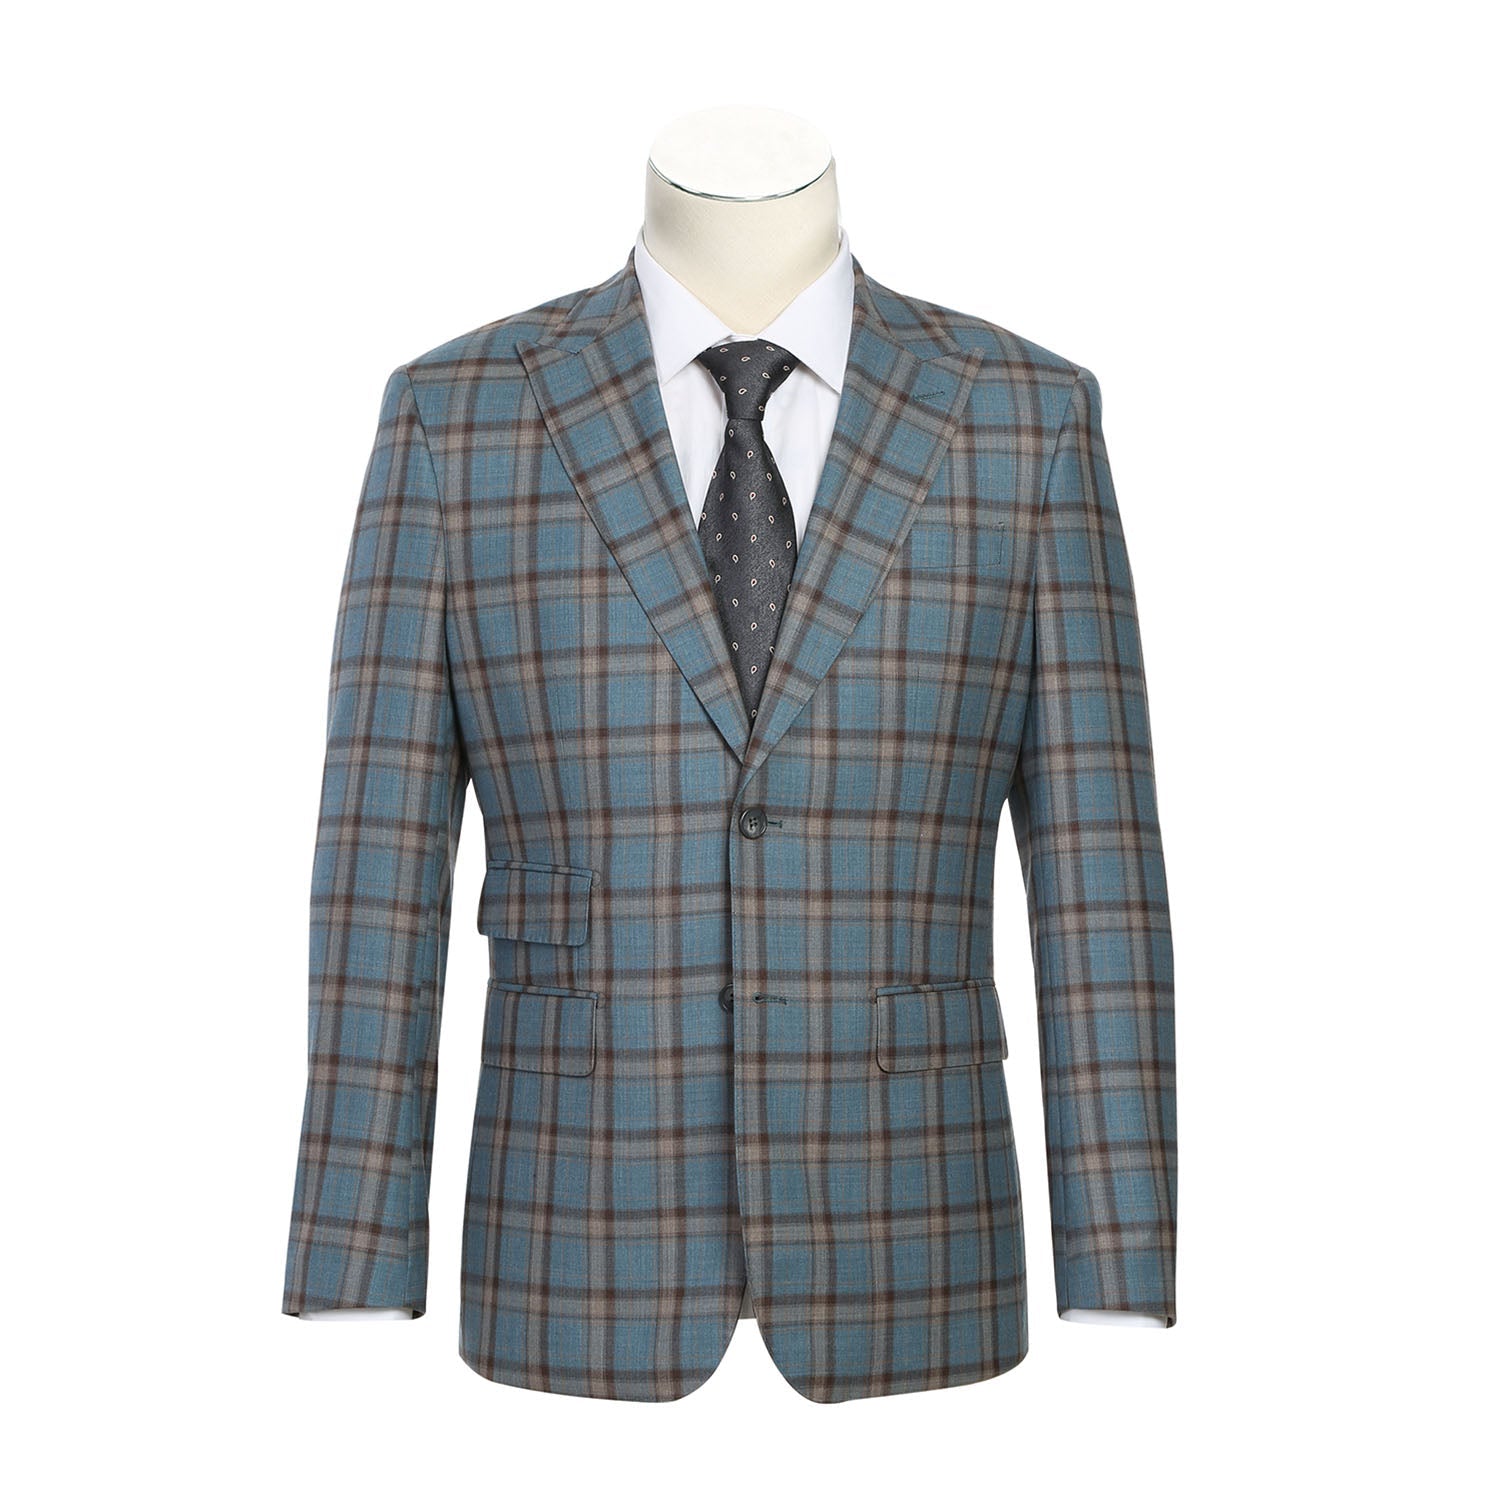 English Laundry Light Gray with Bronze Stereoscopic-Grid Wool Suit 1